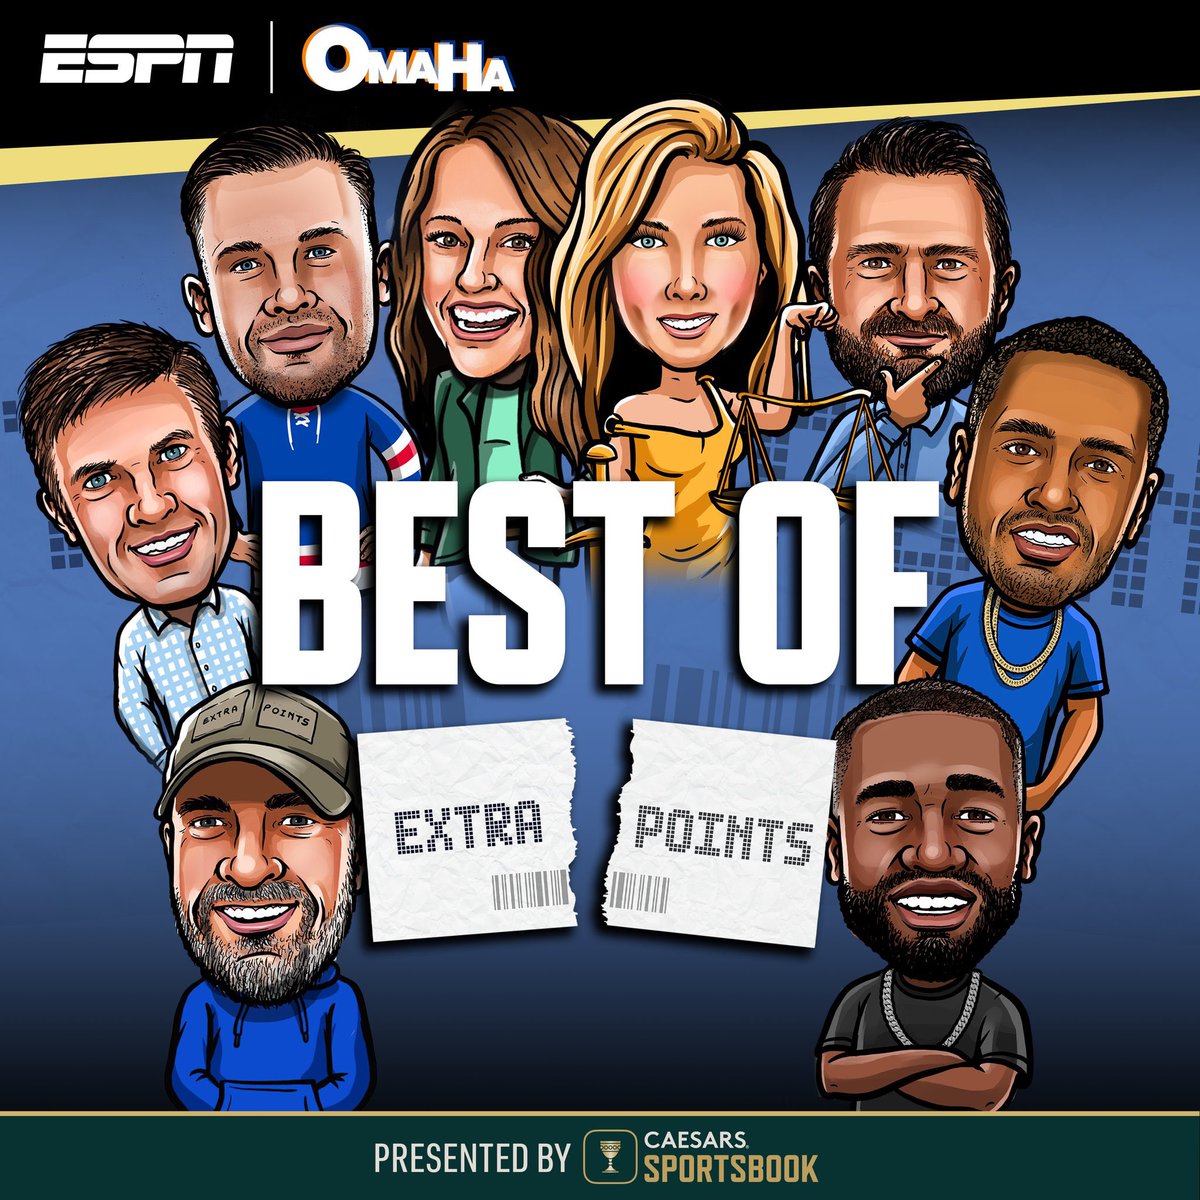 Want to hear your favorite clips from everything at Extra Points? Listen to the Best Of! -Bob Kraft says you can’t trust Bill Belichick -Caitlin Clark gets weirded out -Draft for need or BPA? -Should the Bucks be scare of the Pacers? Listen! Apple: tinyurl.com/6m3cbyme